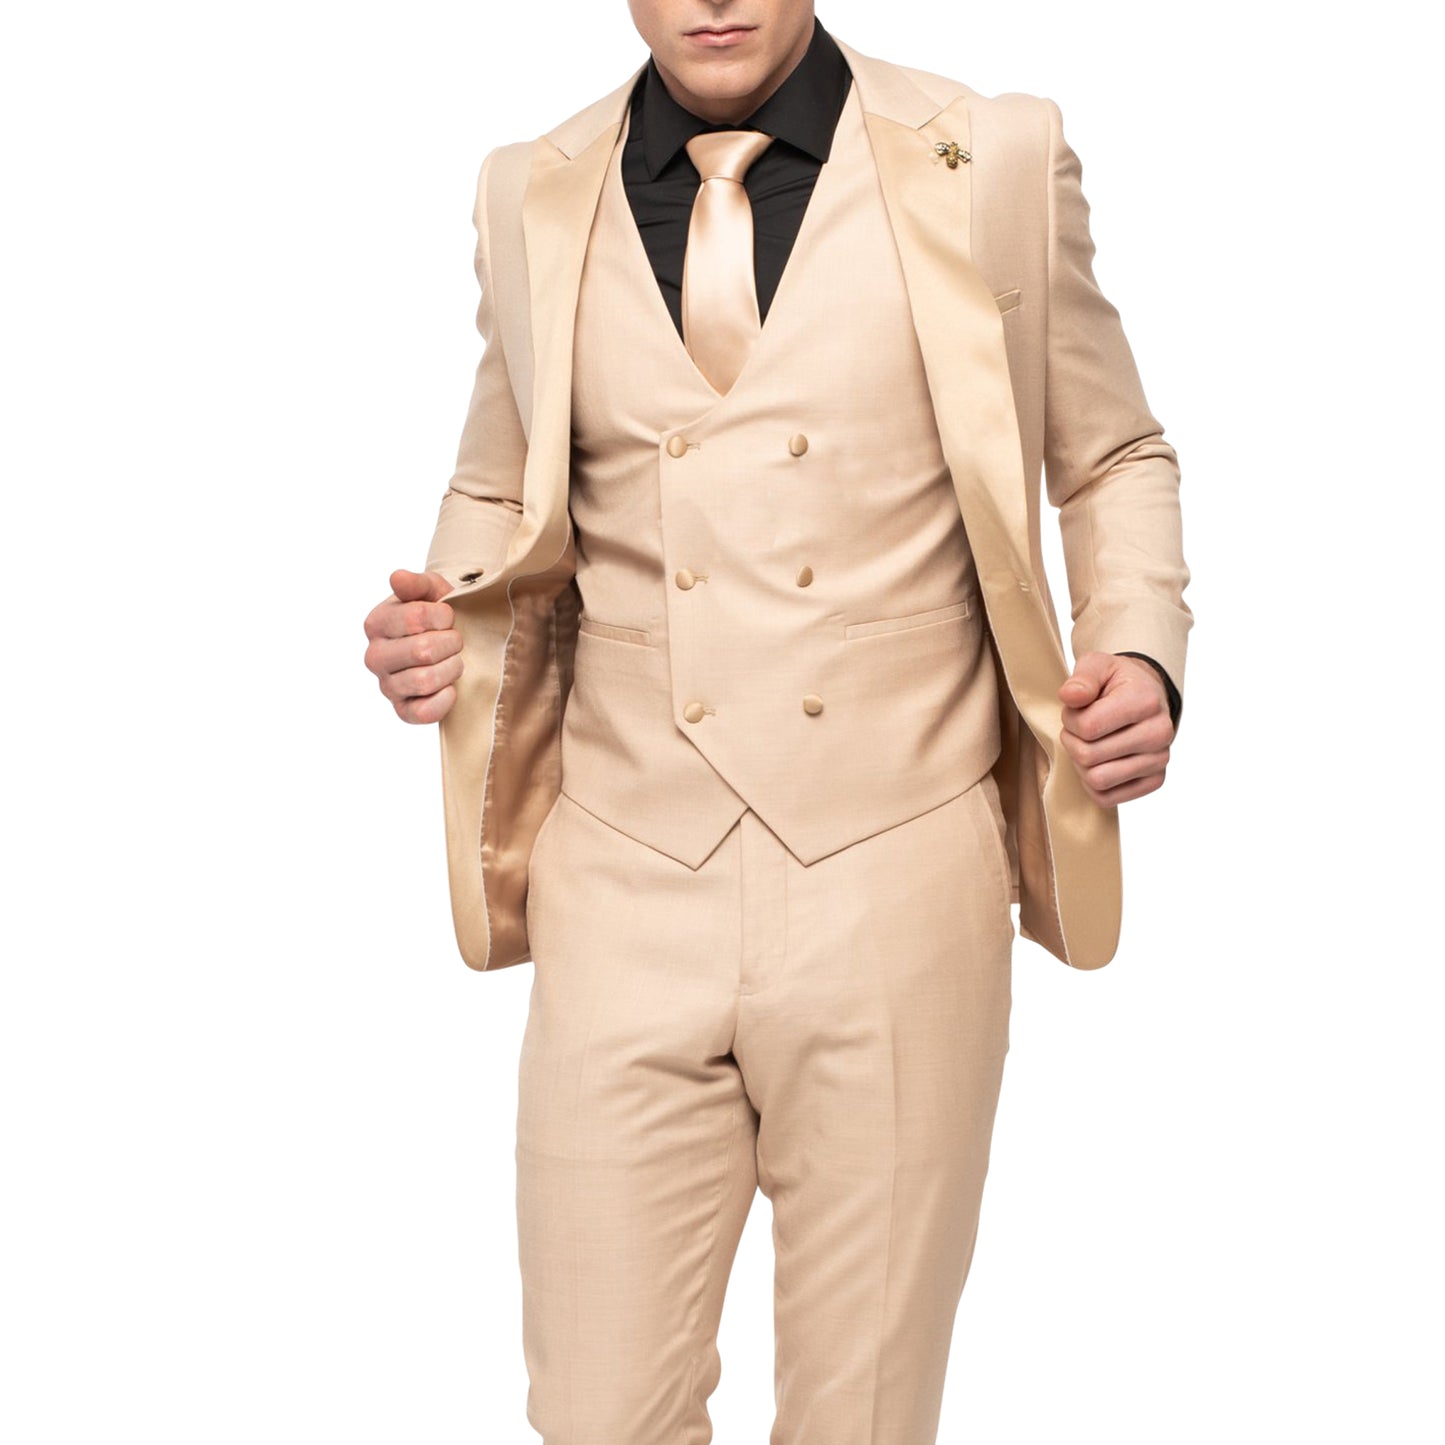 Tan Tuxedo With Double Breasted Vest